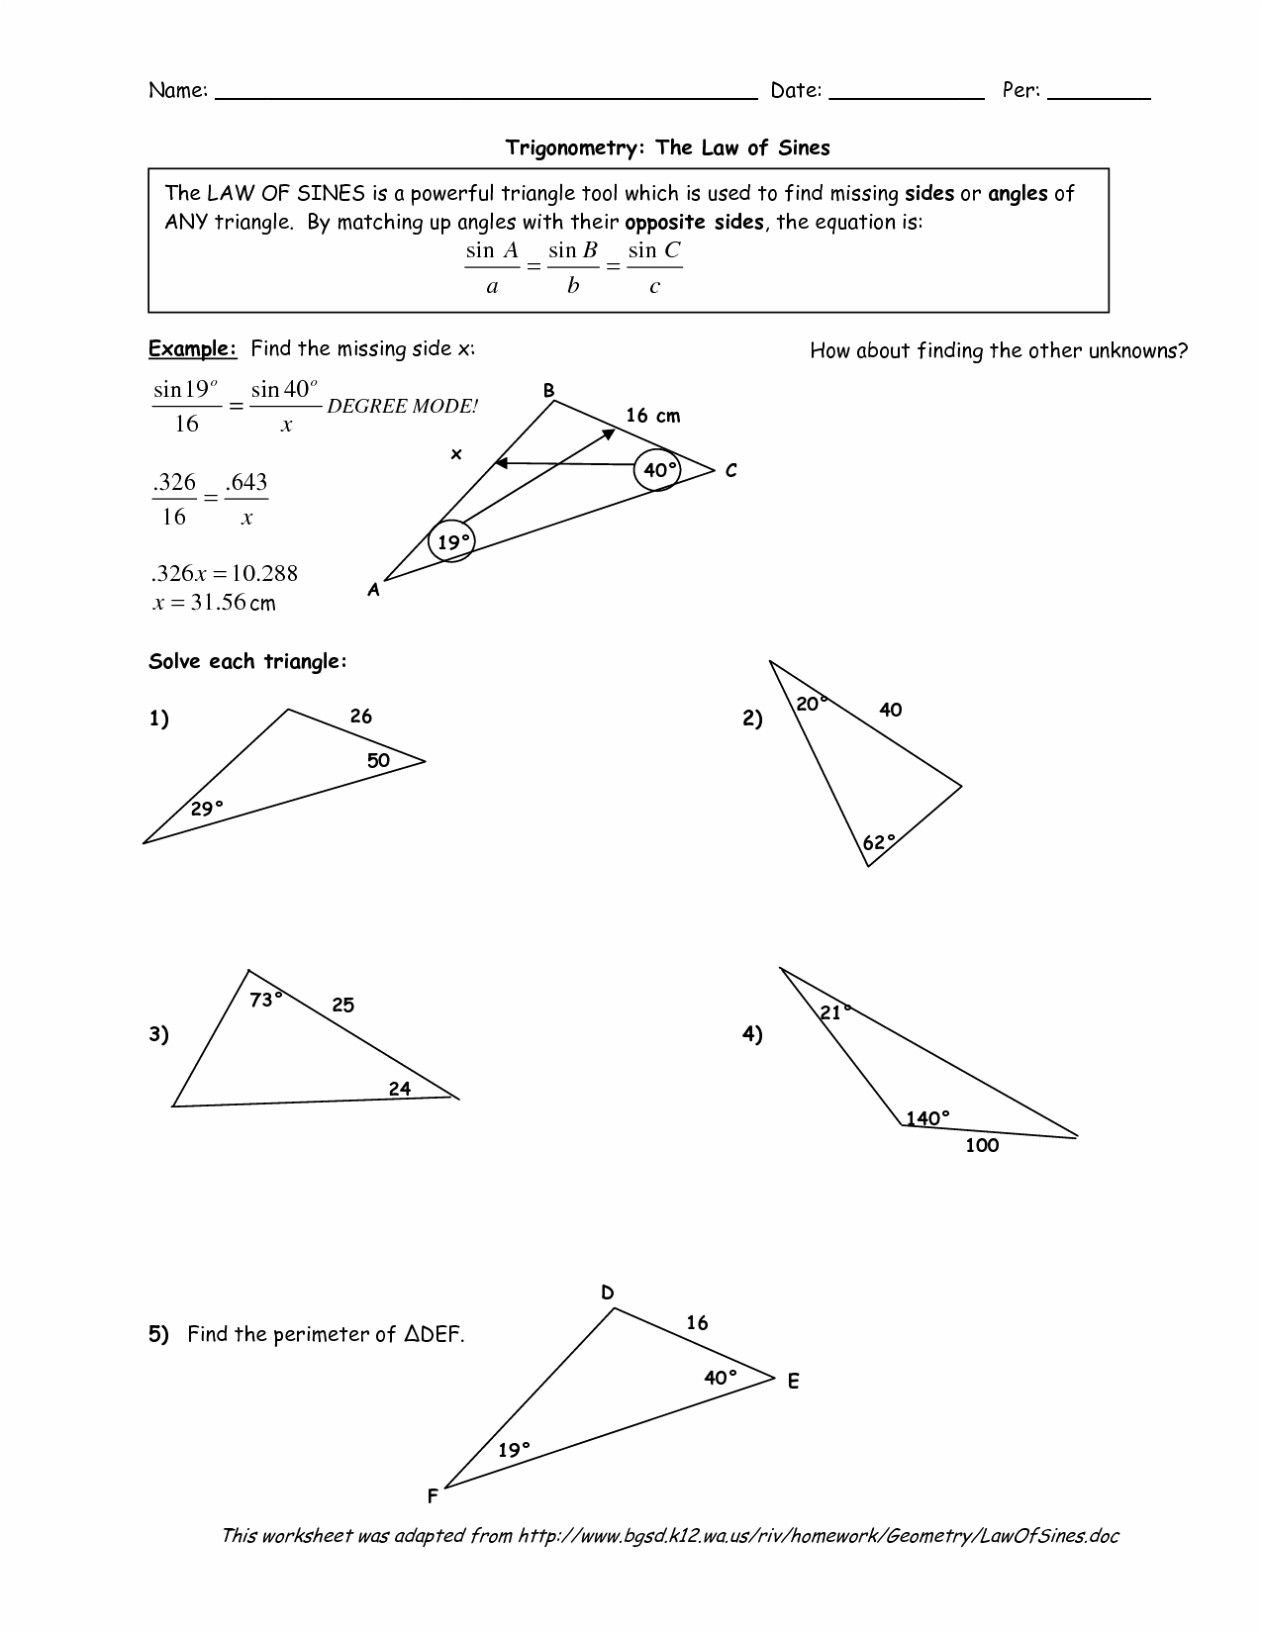 Law Of Sines Practice Worksheet Answers  Briefencounters With Regard To Law Of Sines Practice Worksheet Answers